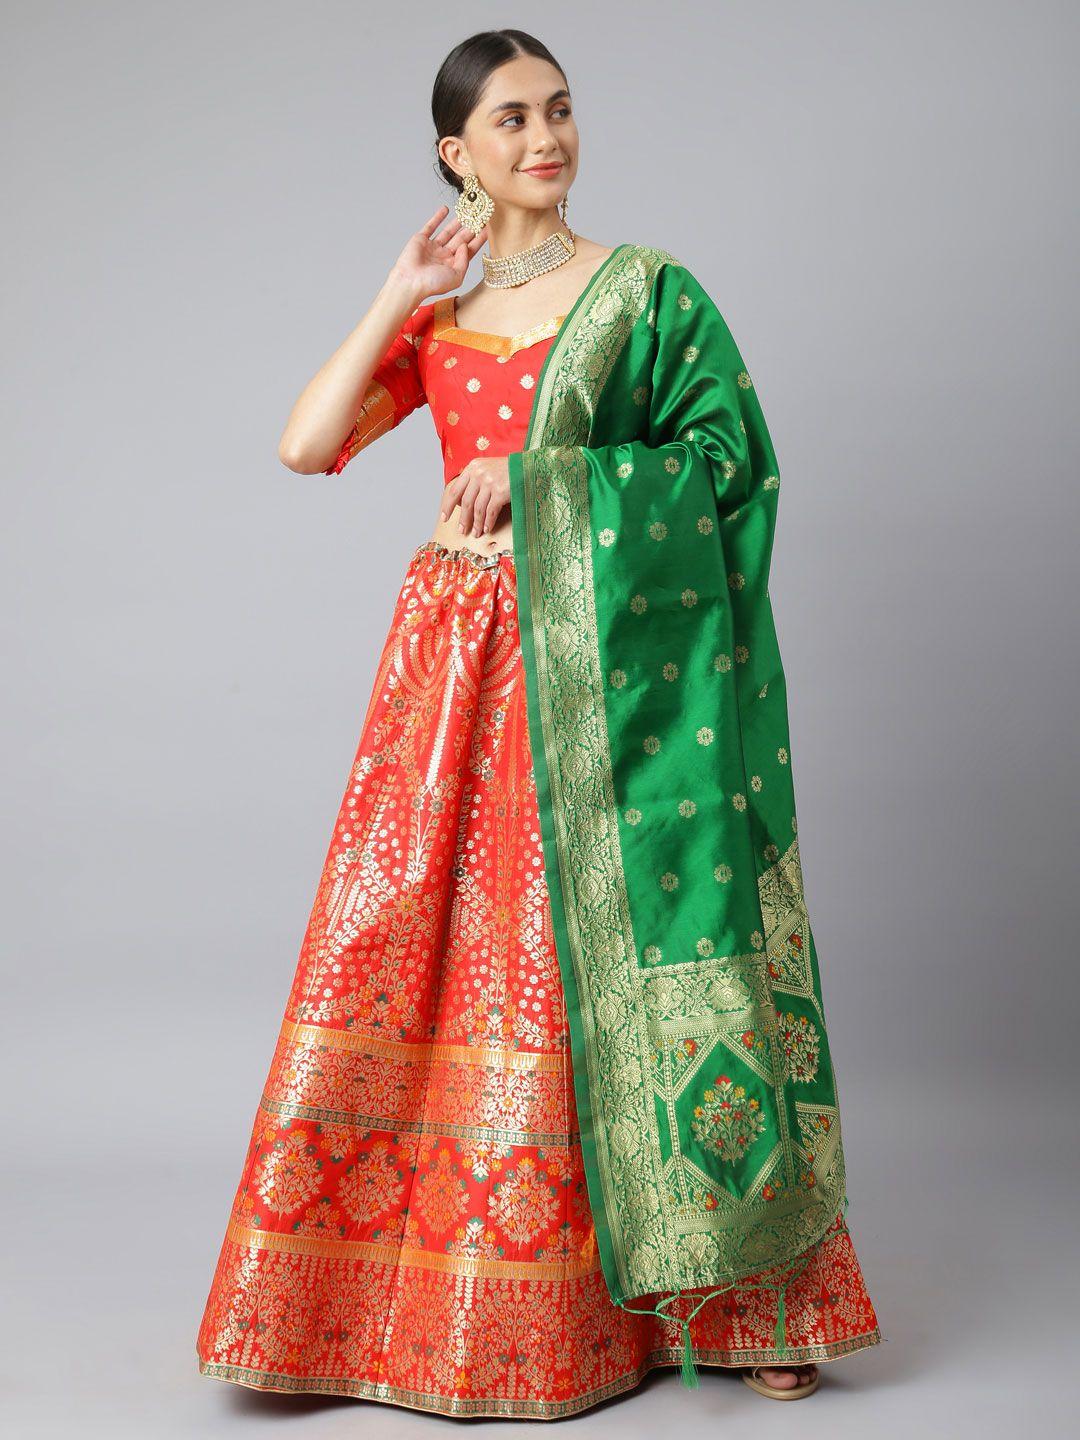 lilots red & green semi-stitched lehenga & unstitched blouse with dupatta